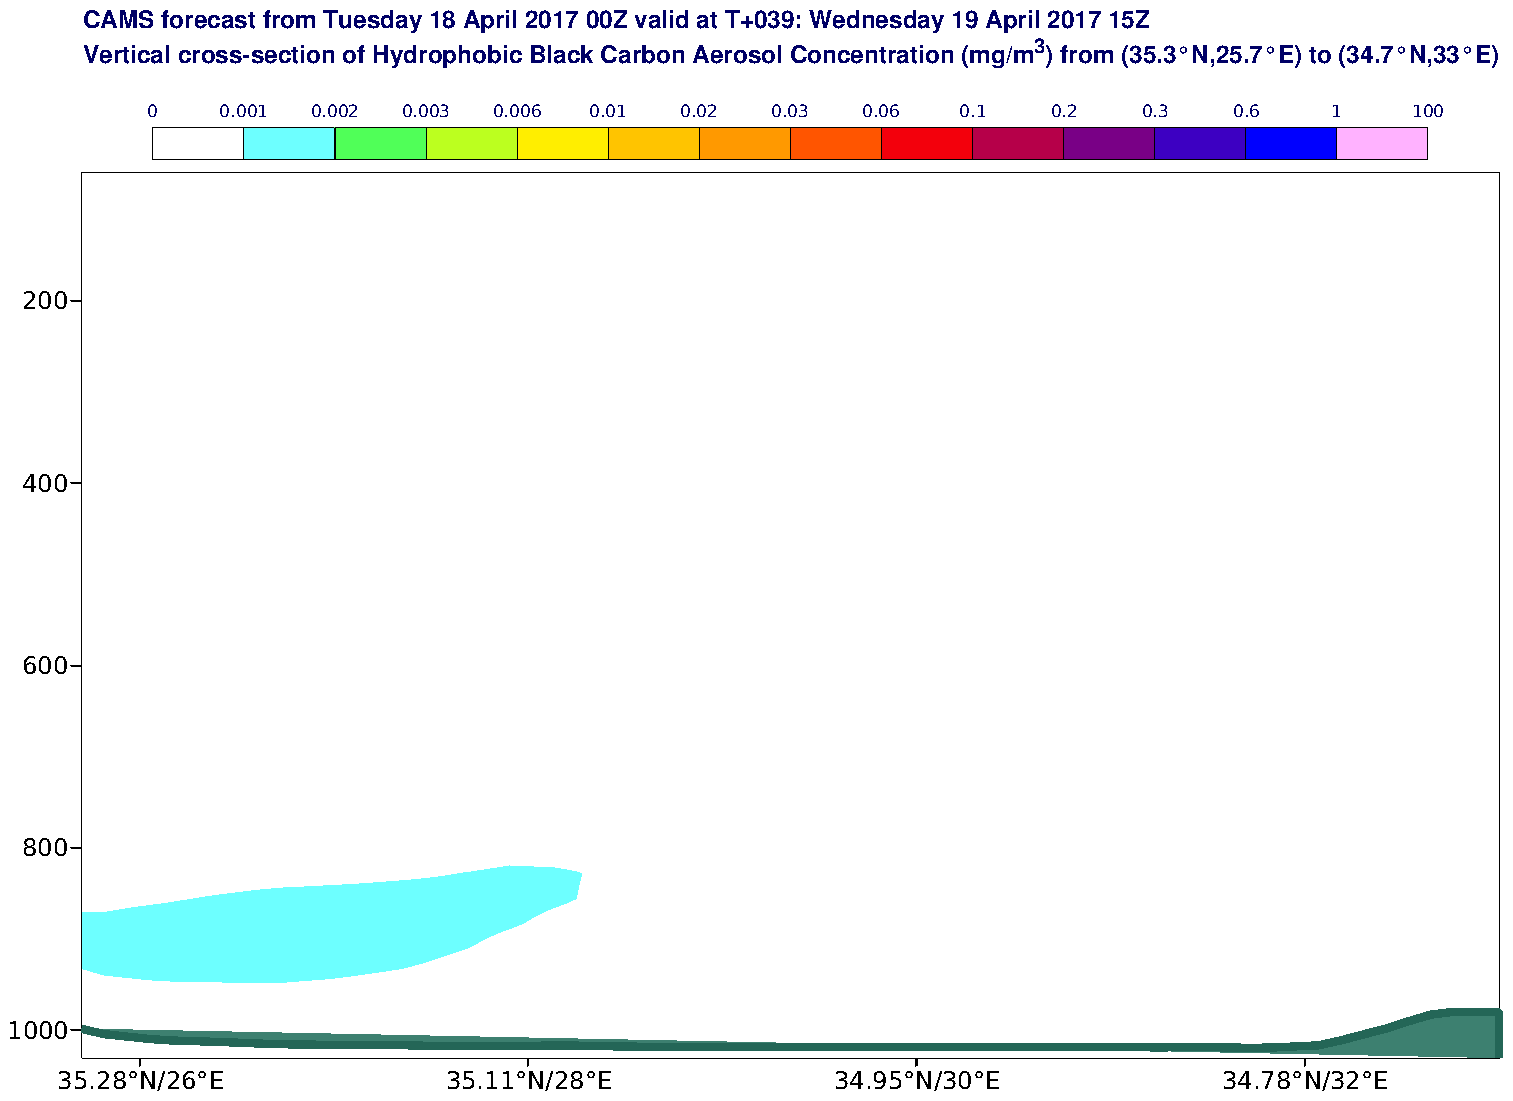 Vertical cross-section of Hydrophobic Black Carbon Aerosol Concentration (mg/m3) valid at T39 - 2017-04-19 15:00